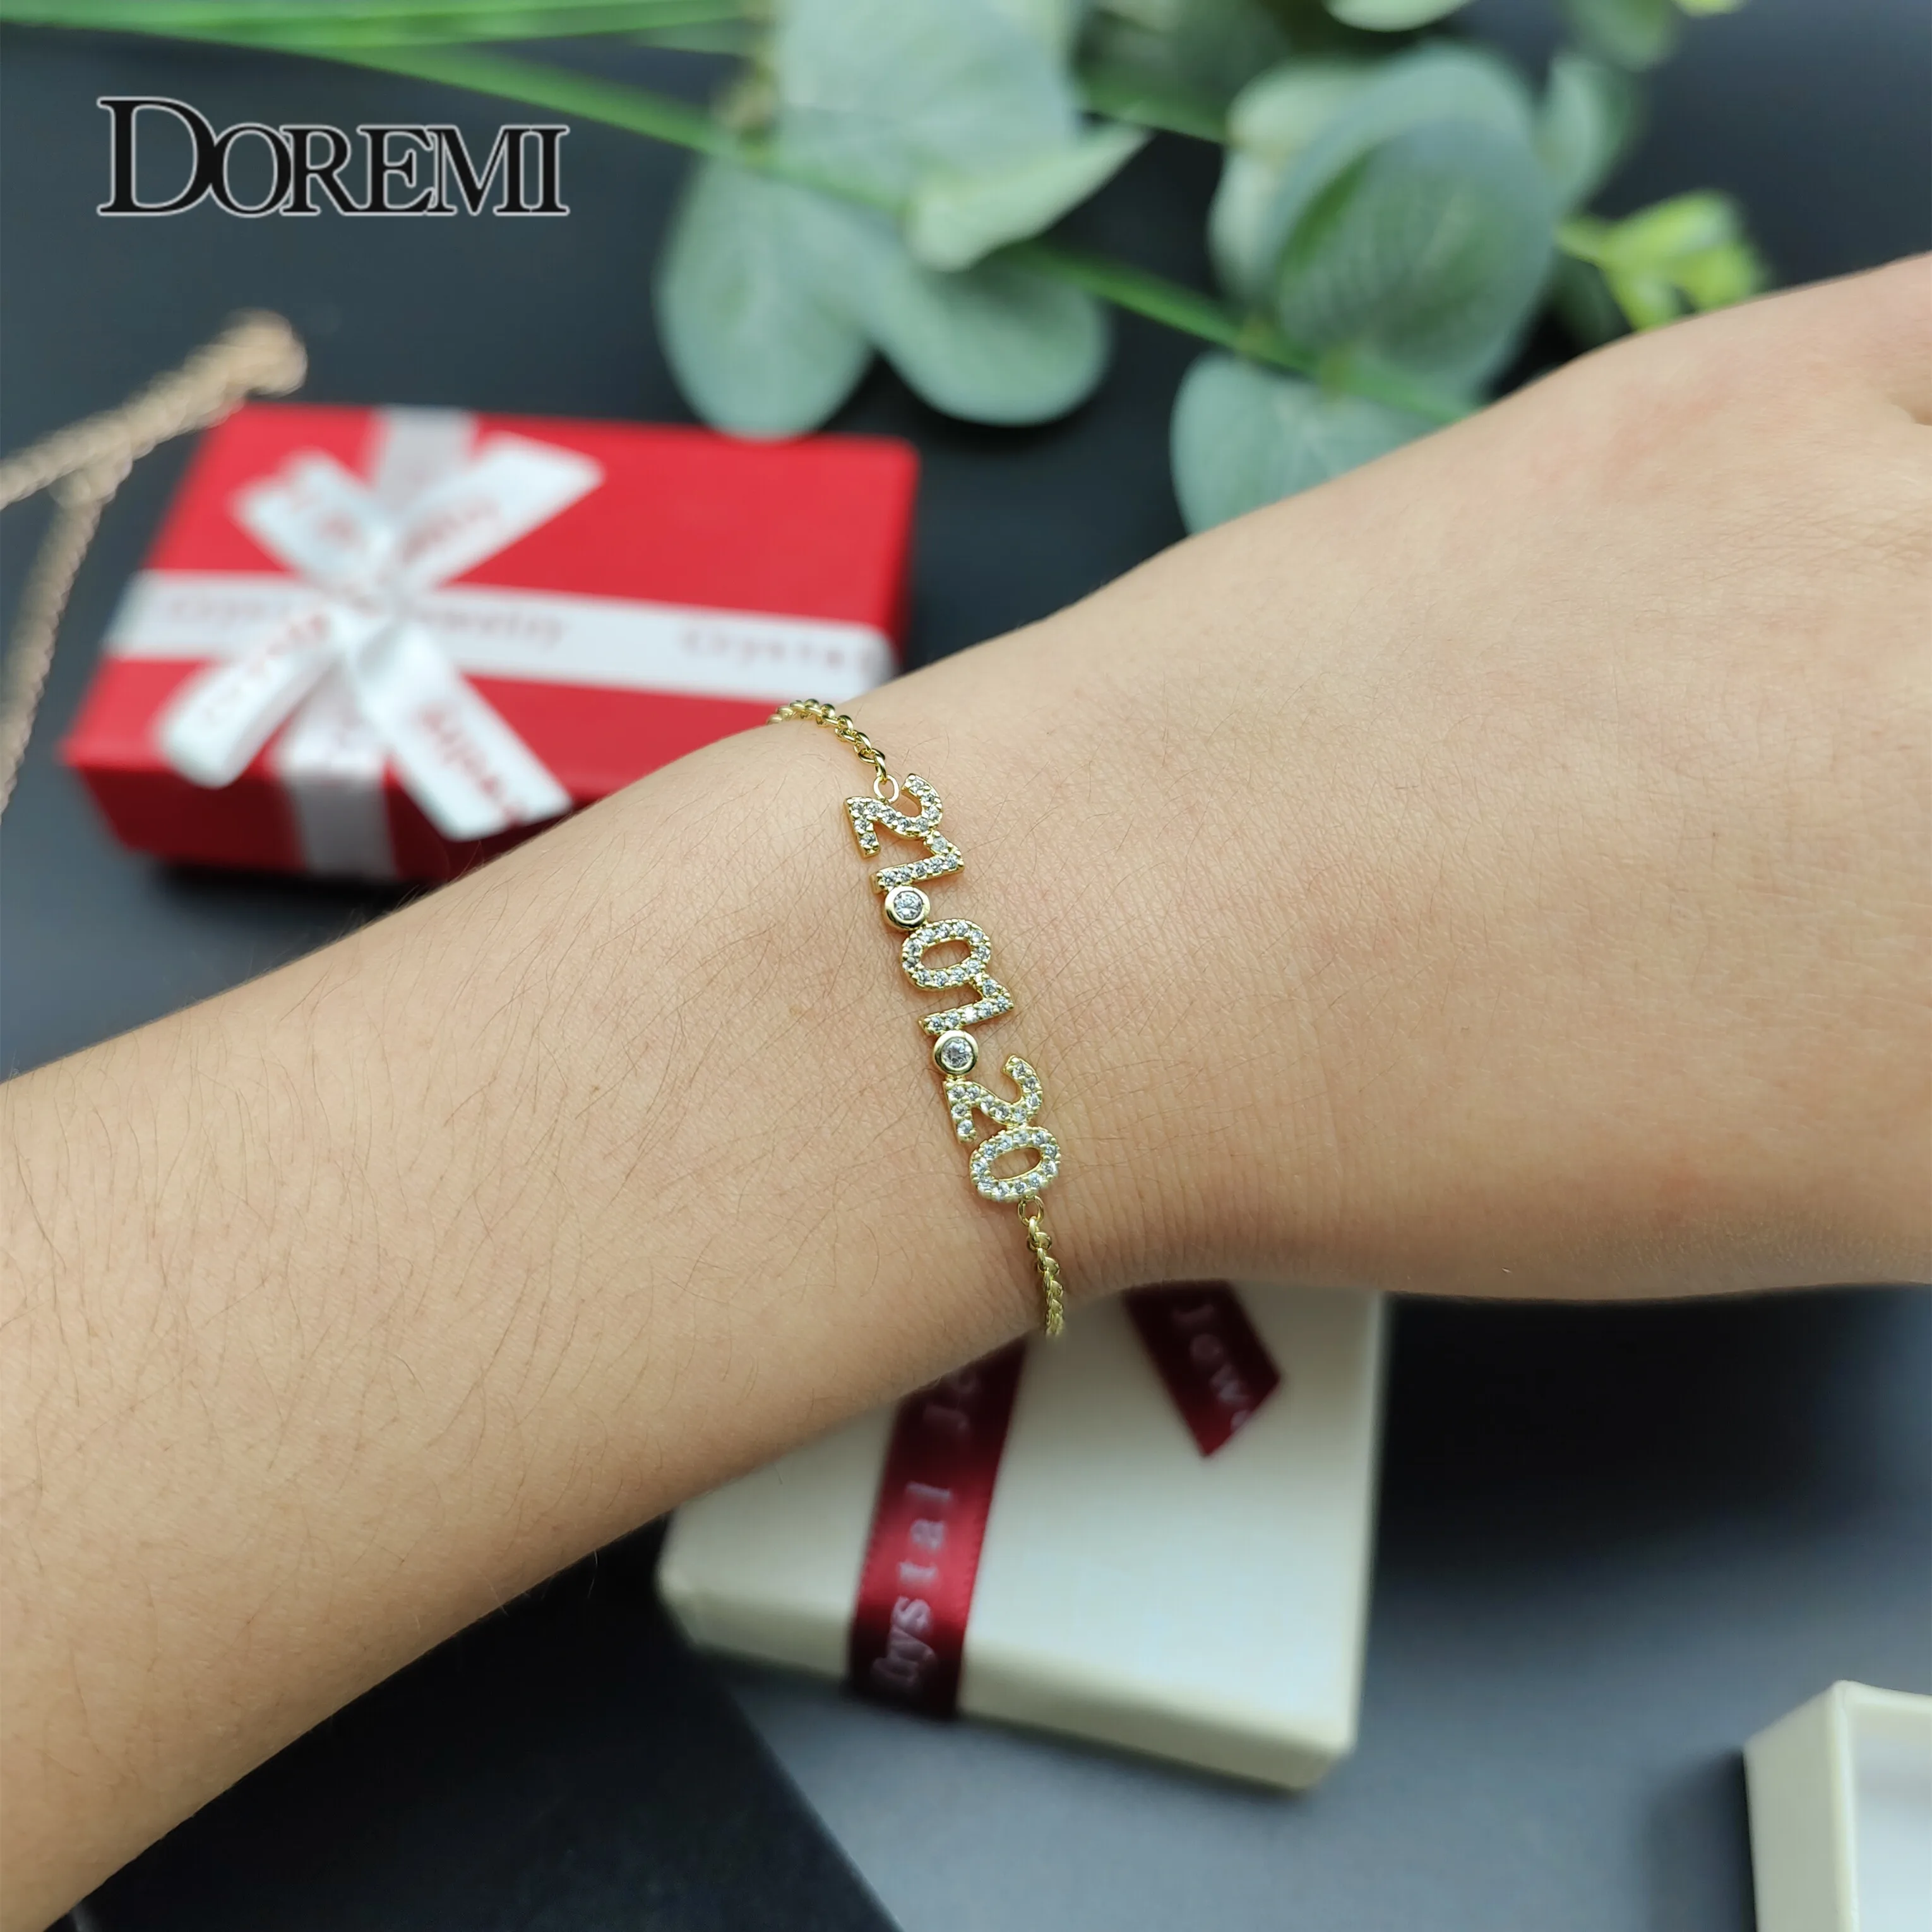 Jewelryonclick Genuine Multi Stone Gold Plated Bracelets for Women Birthday Gift Length 6.5,7,7.5,8 Inch